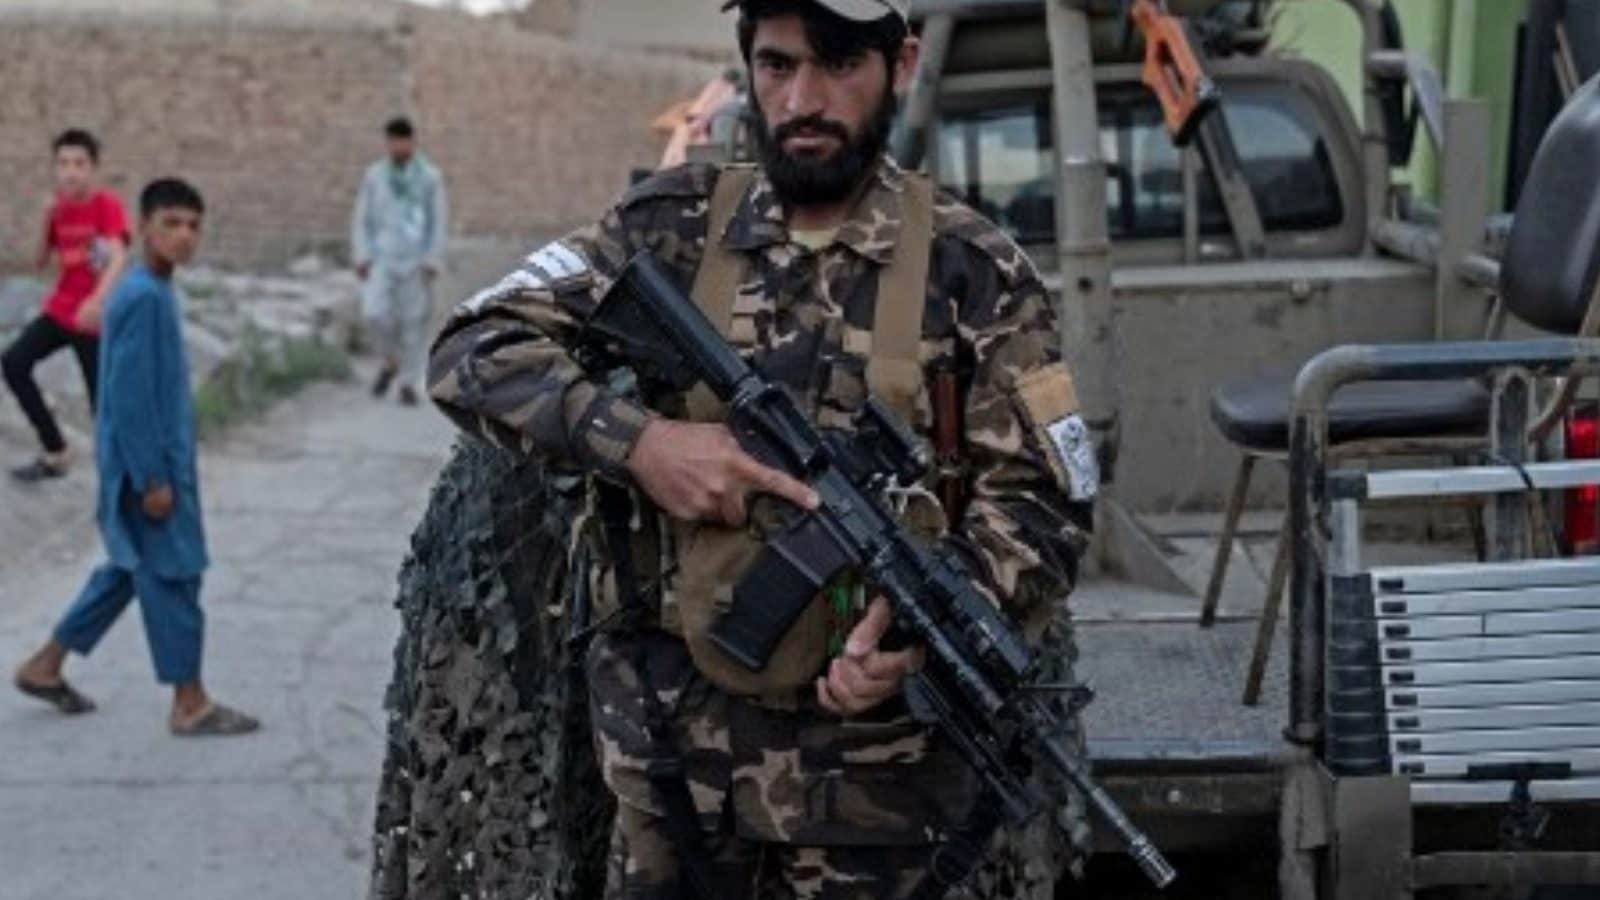 Kabul: Explosion at Mosque in Vicinity of Taliban Interior Ministry; Several Feared Dead